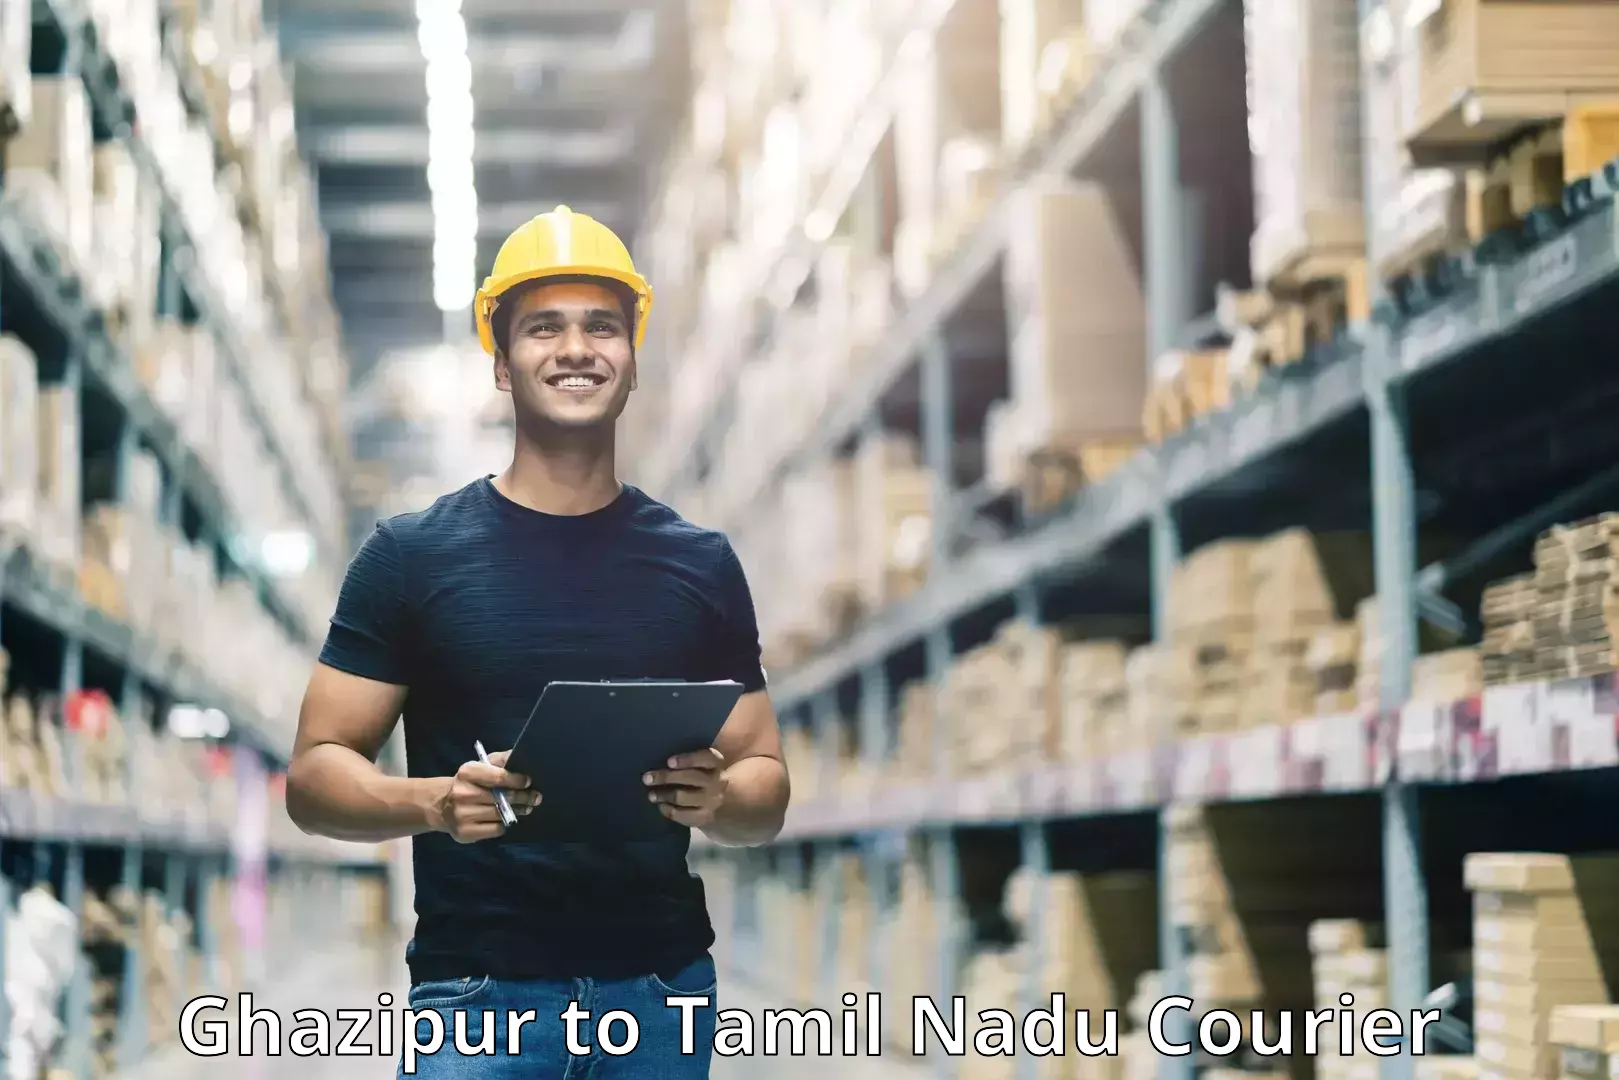 Reliable courier service Ghazipur to Tamil Nadu